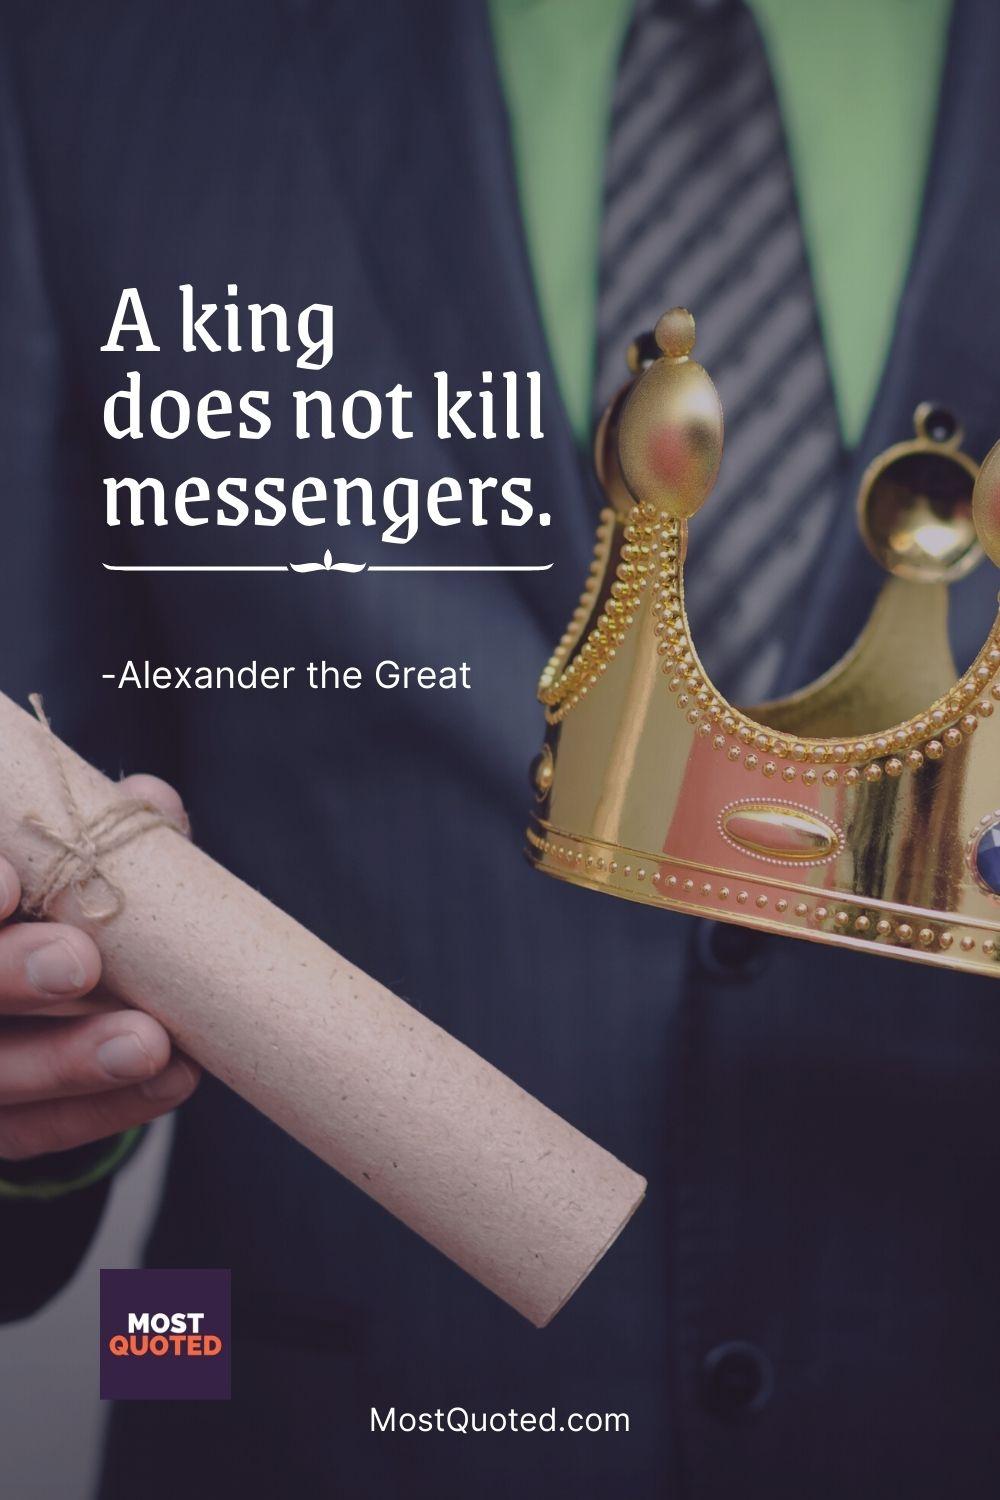 A king does not kill messengers. - Alexander the Great